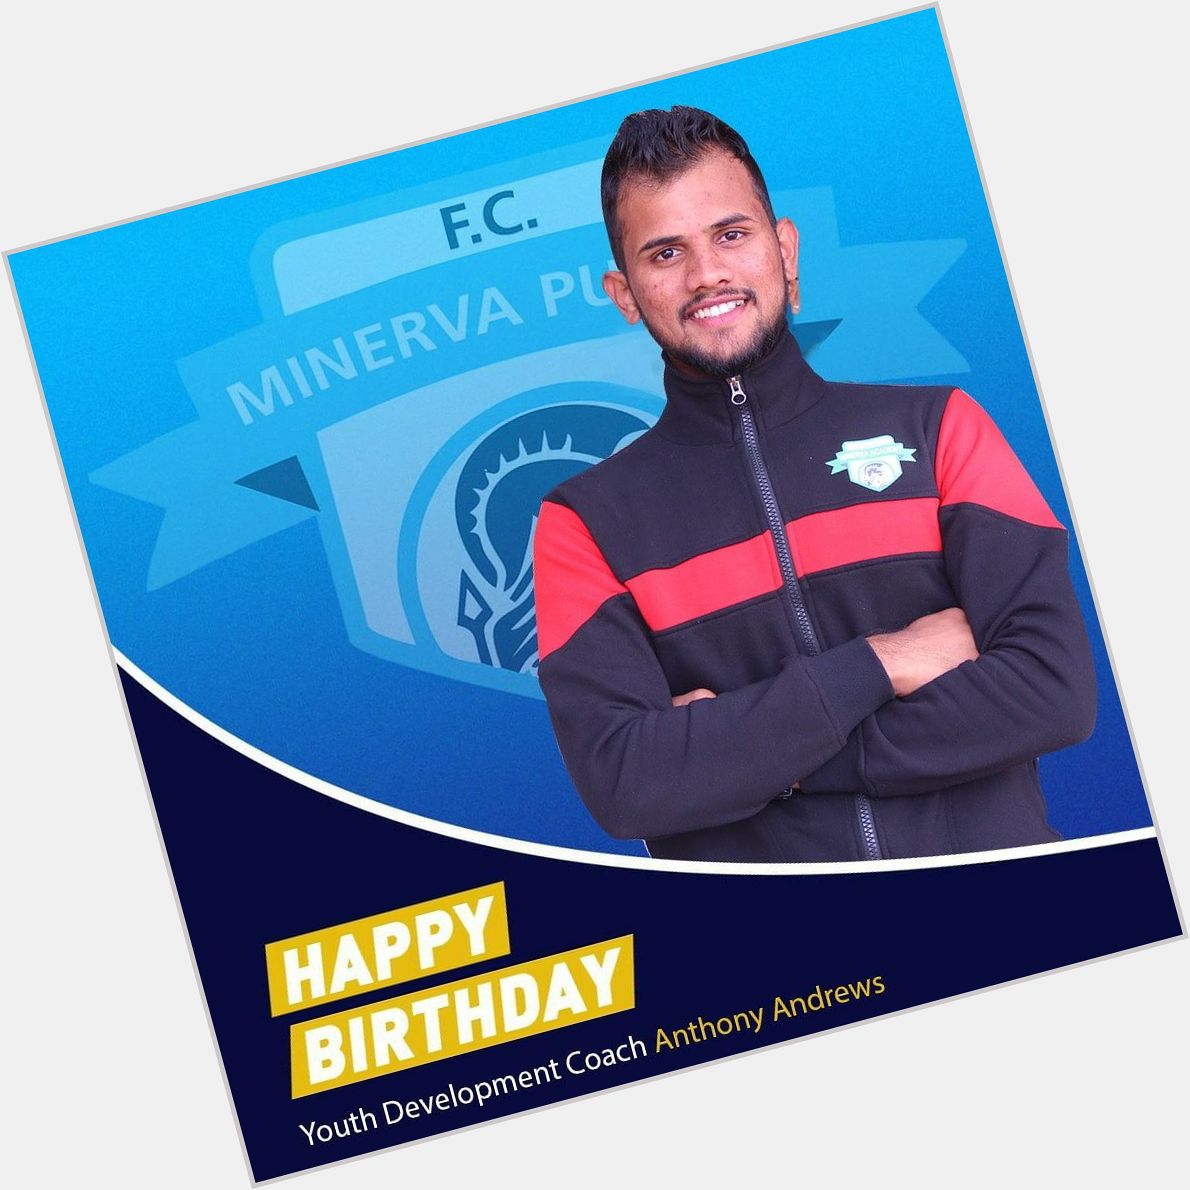 Join us wishing our youth development coach Anthony Andrews a very happy birthday 